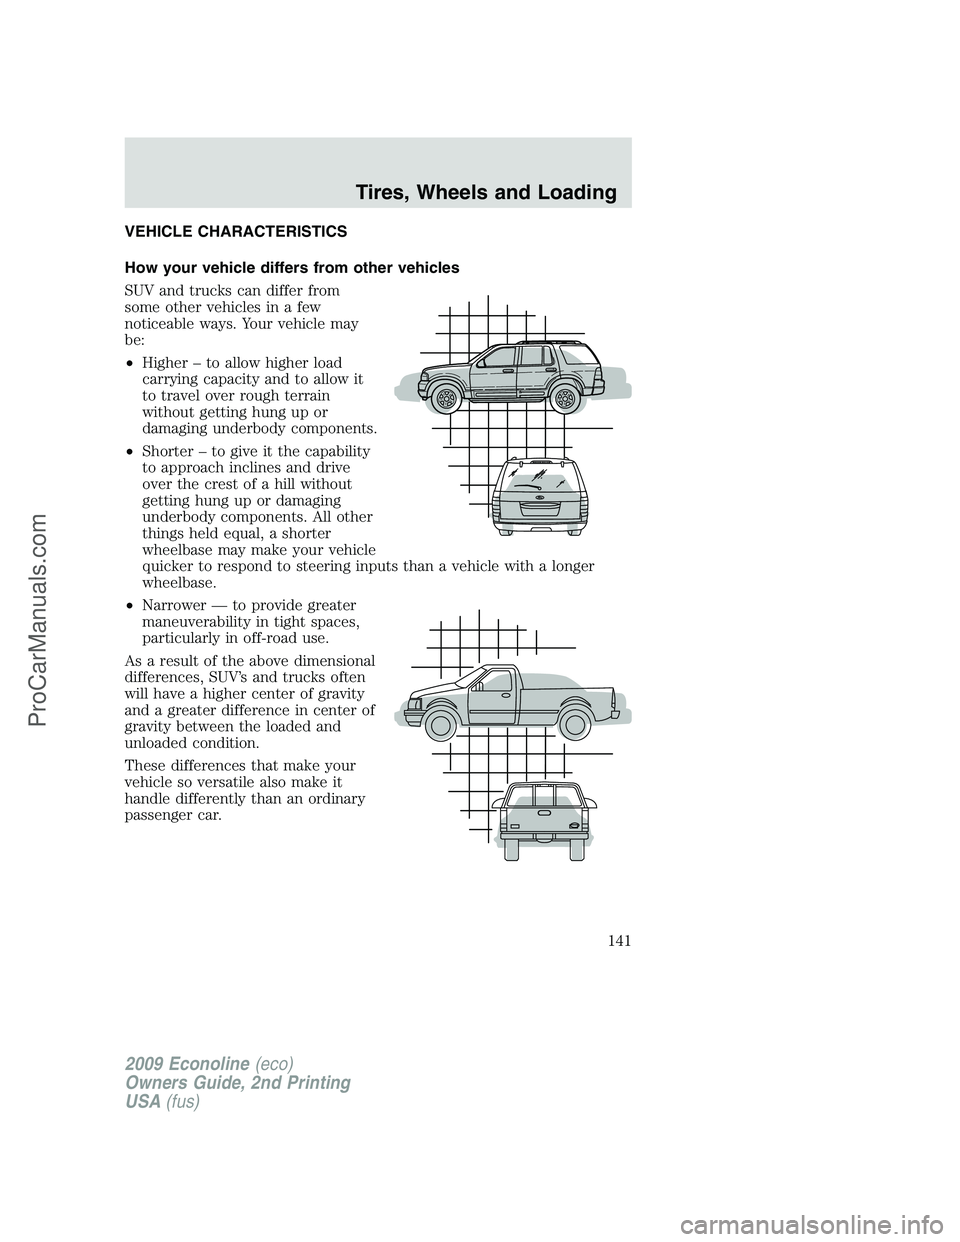 FORD E-250 2009  Owners Manual VEHICLE CHARACTERISTICS
How your vehicle differs from other vehicles
SUV and trucks can differ from
some other vehicles in a few
noticeable ways. Your vehicle may
be:
•Higher – to allow higher loa